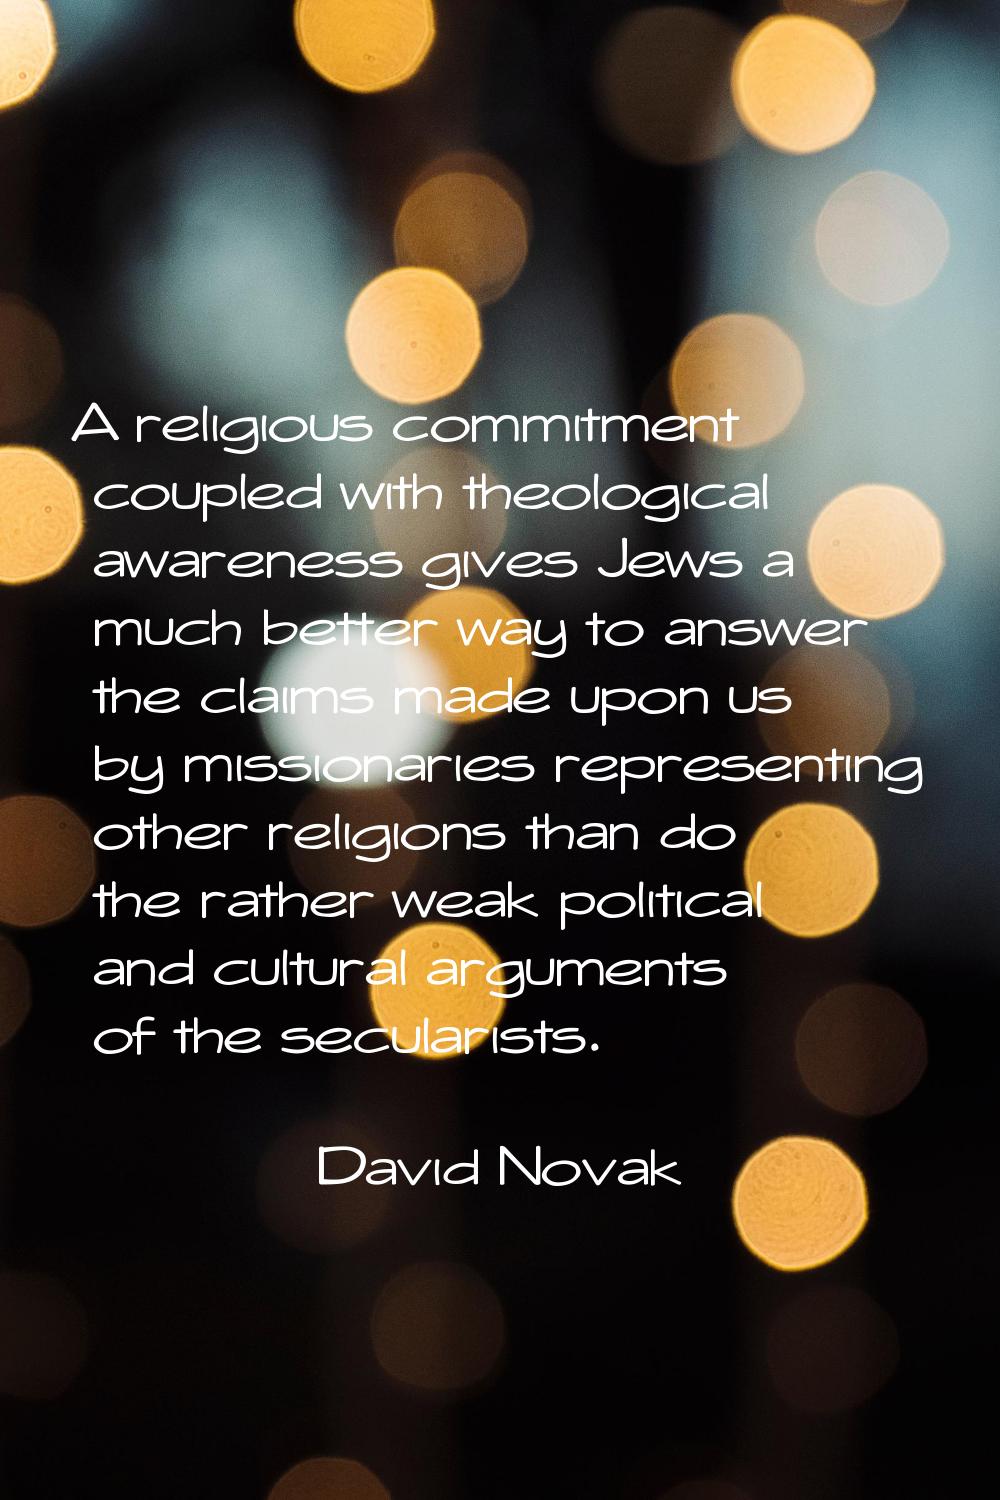 A religious commitment coupled with theological awareness gives Jews a much better way to answer th